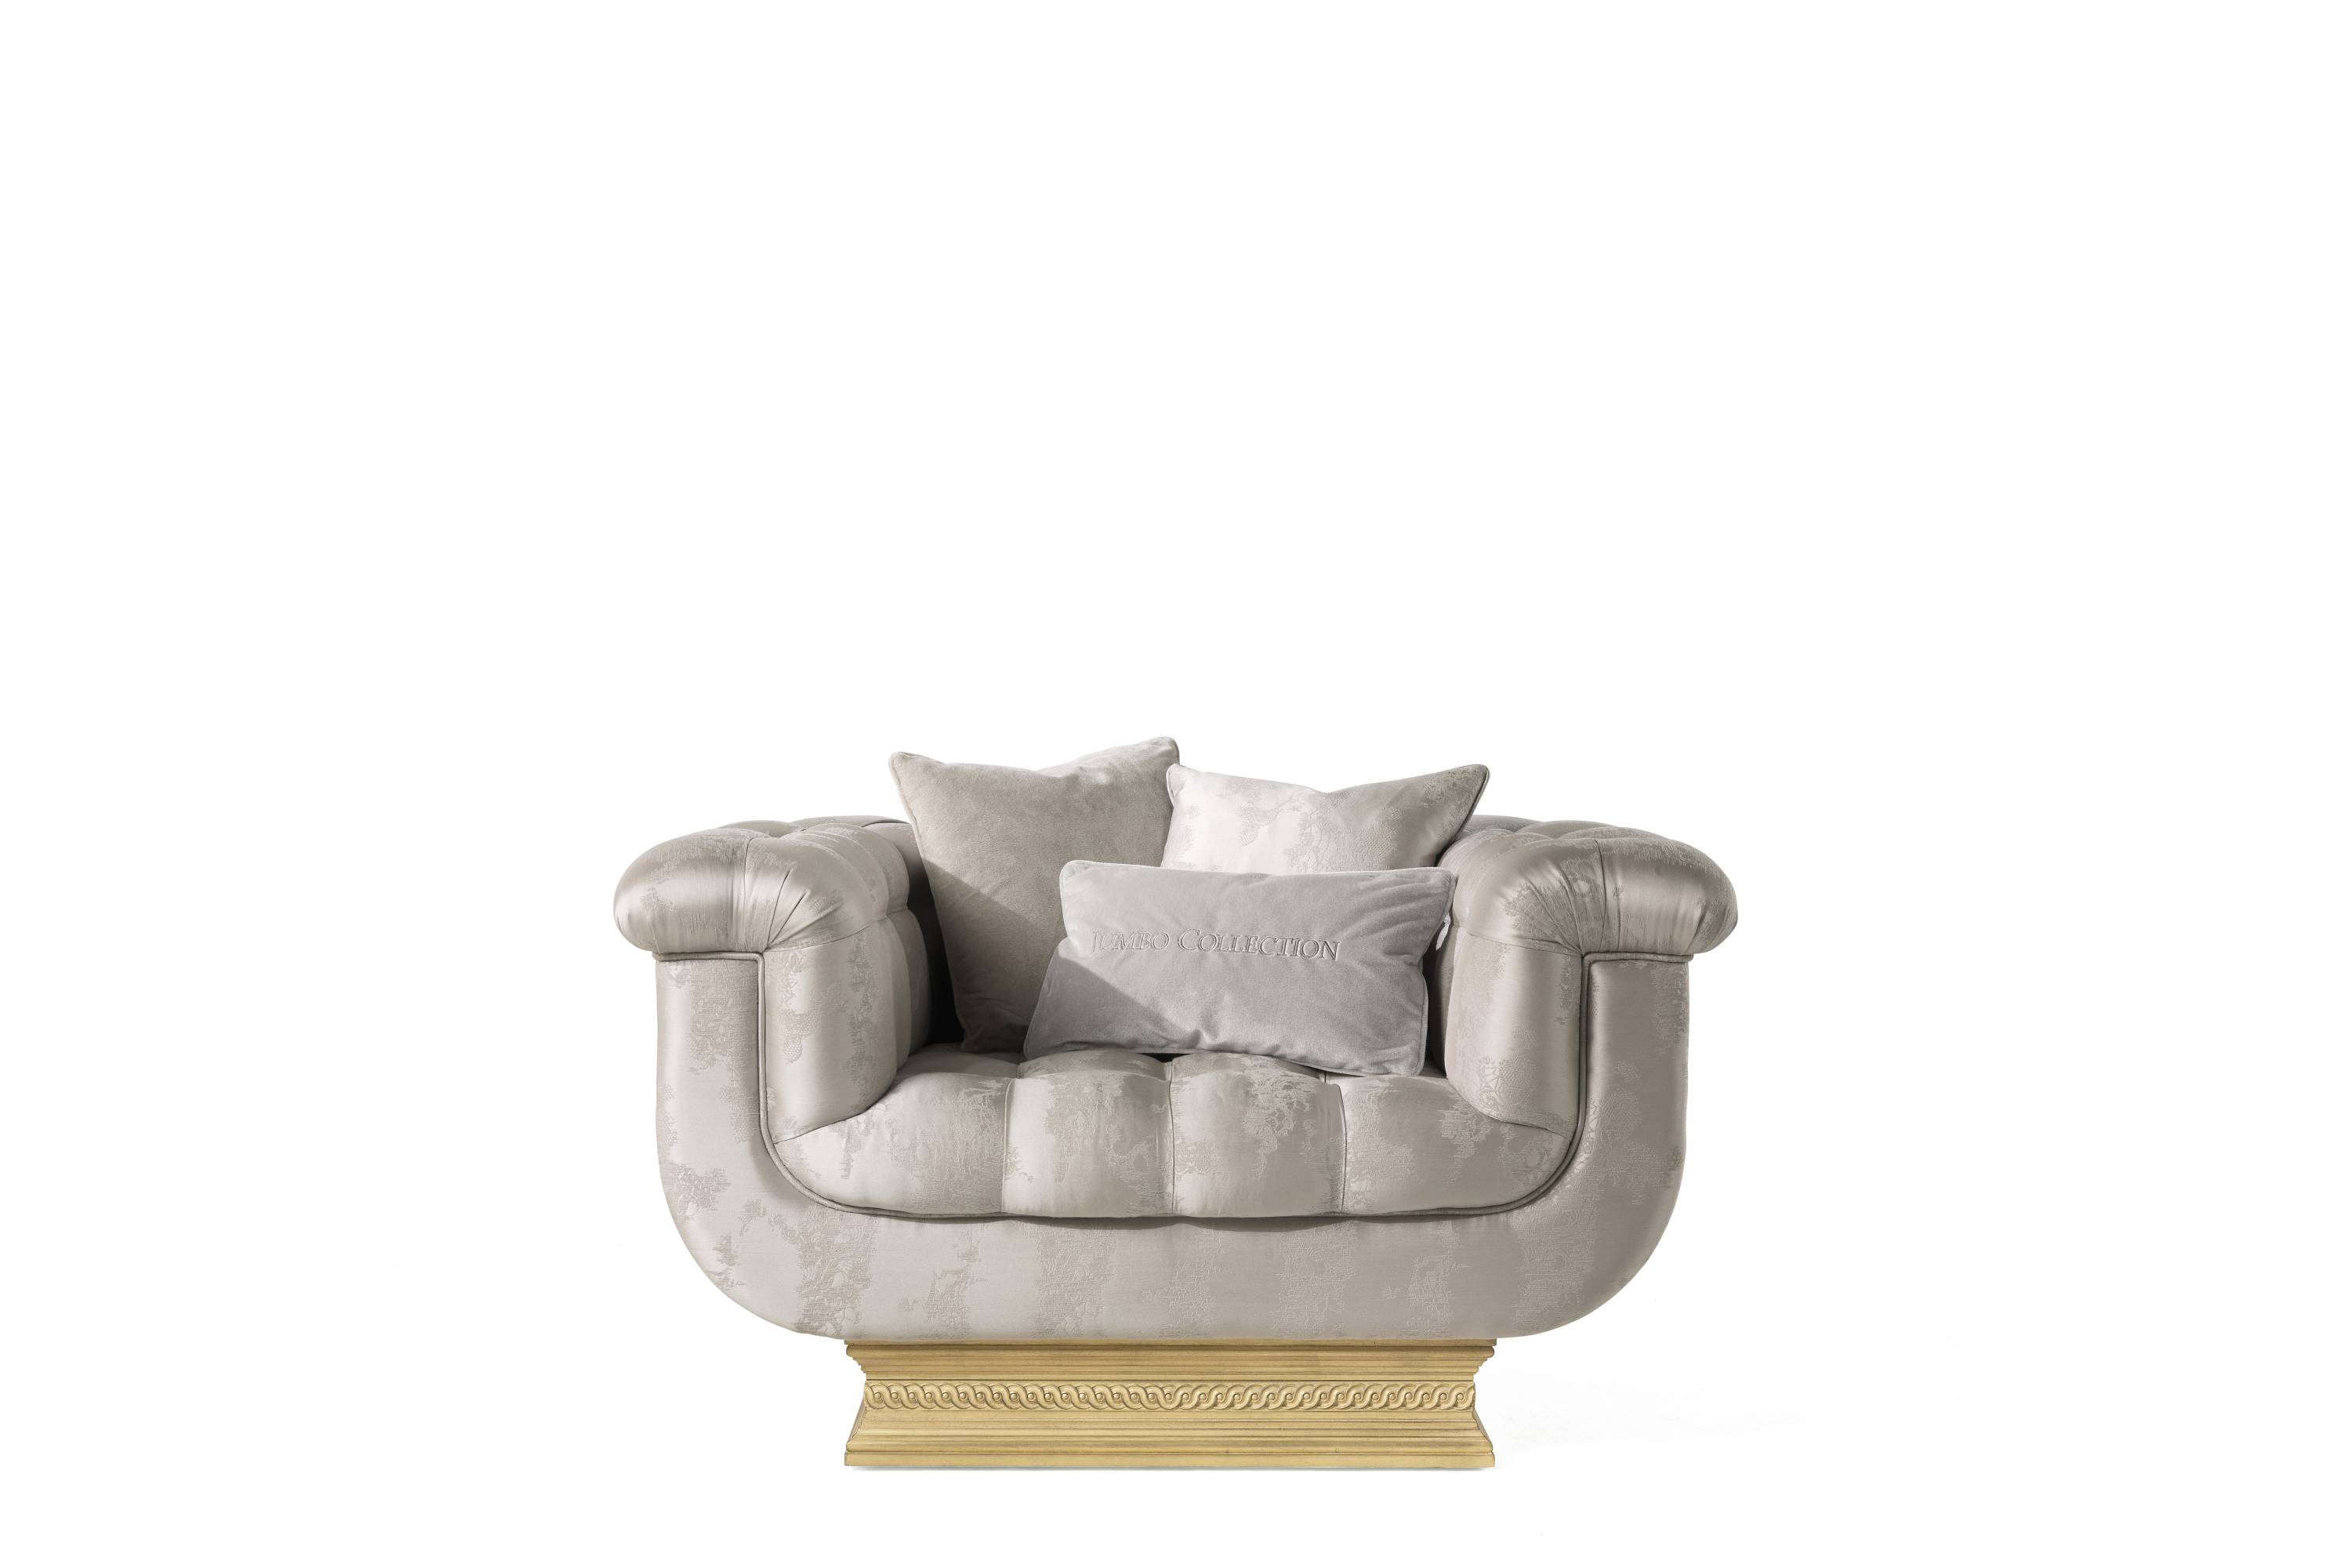 TULIPE armchair - Bespoke projects with luxury Made in Italy classic furniture